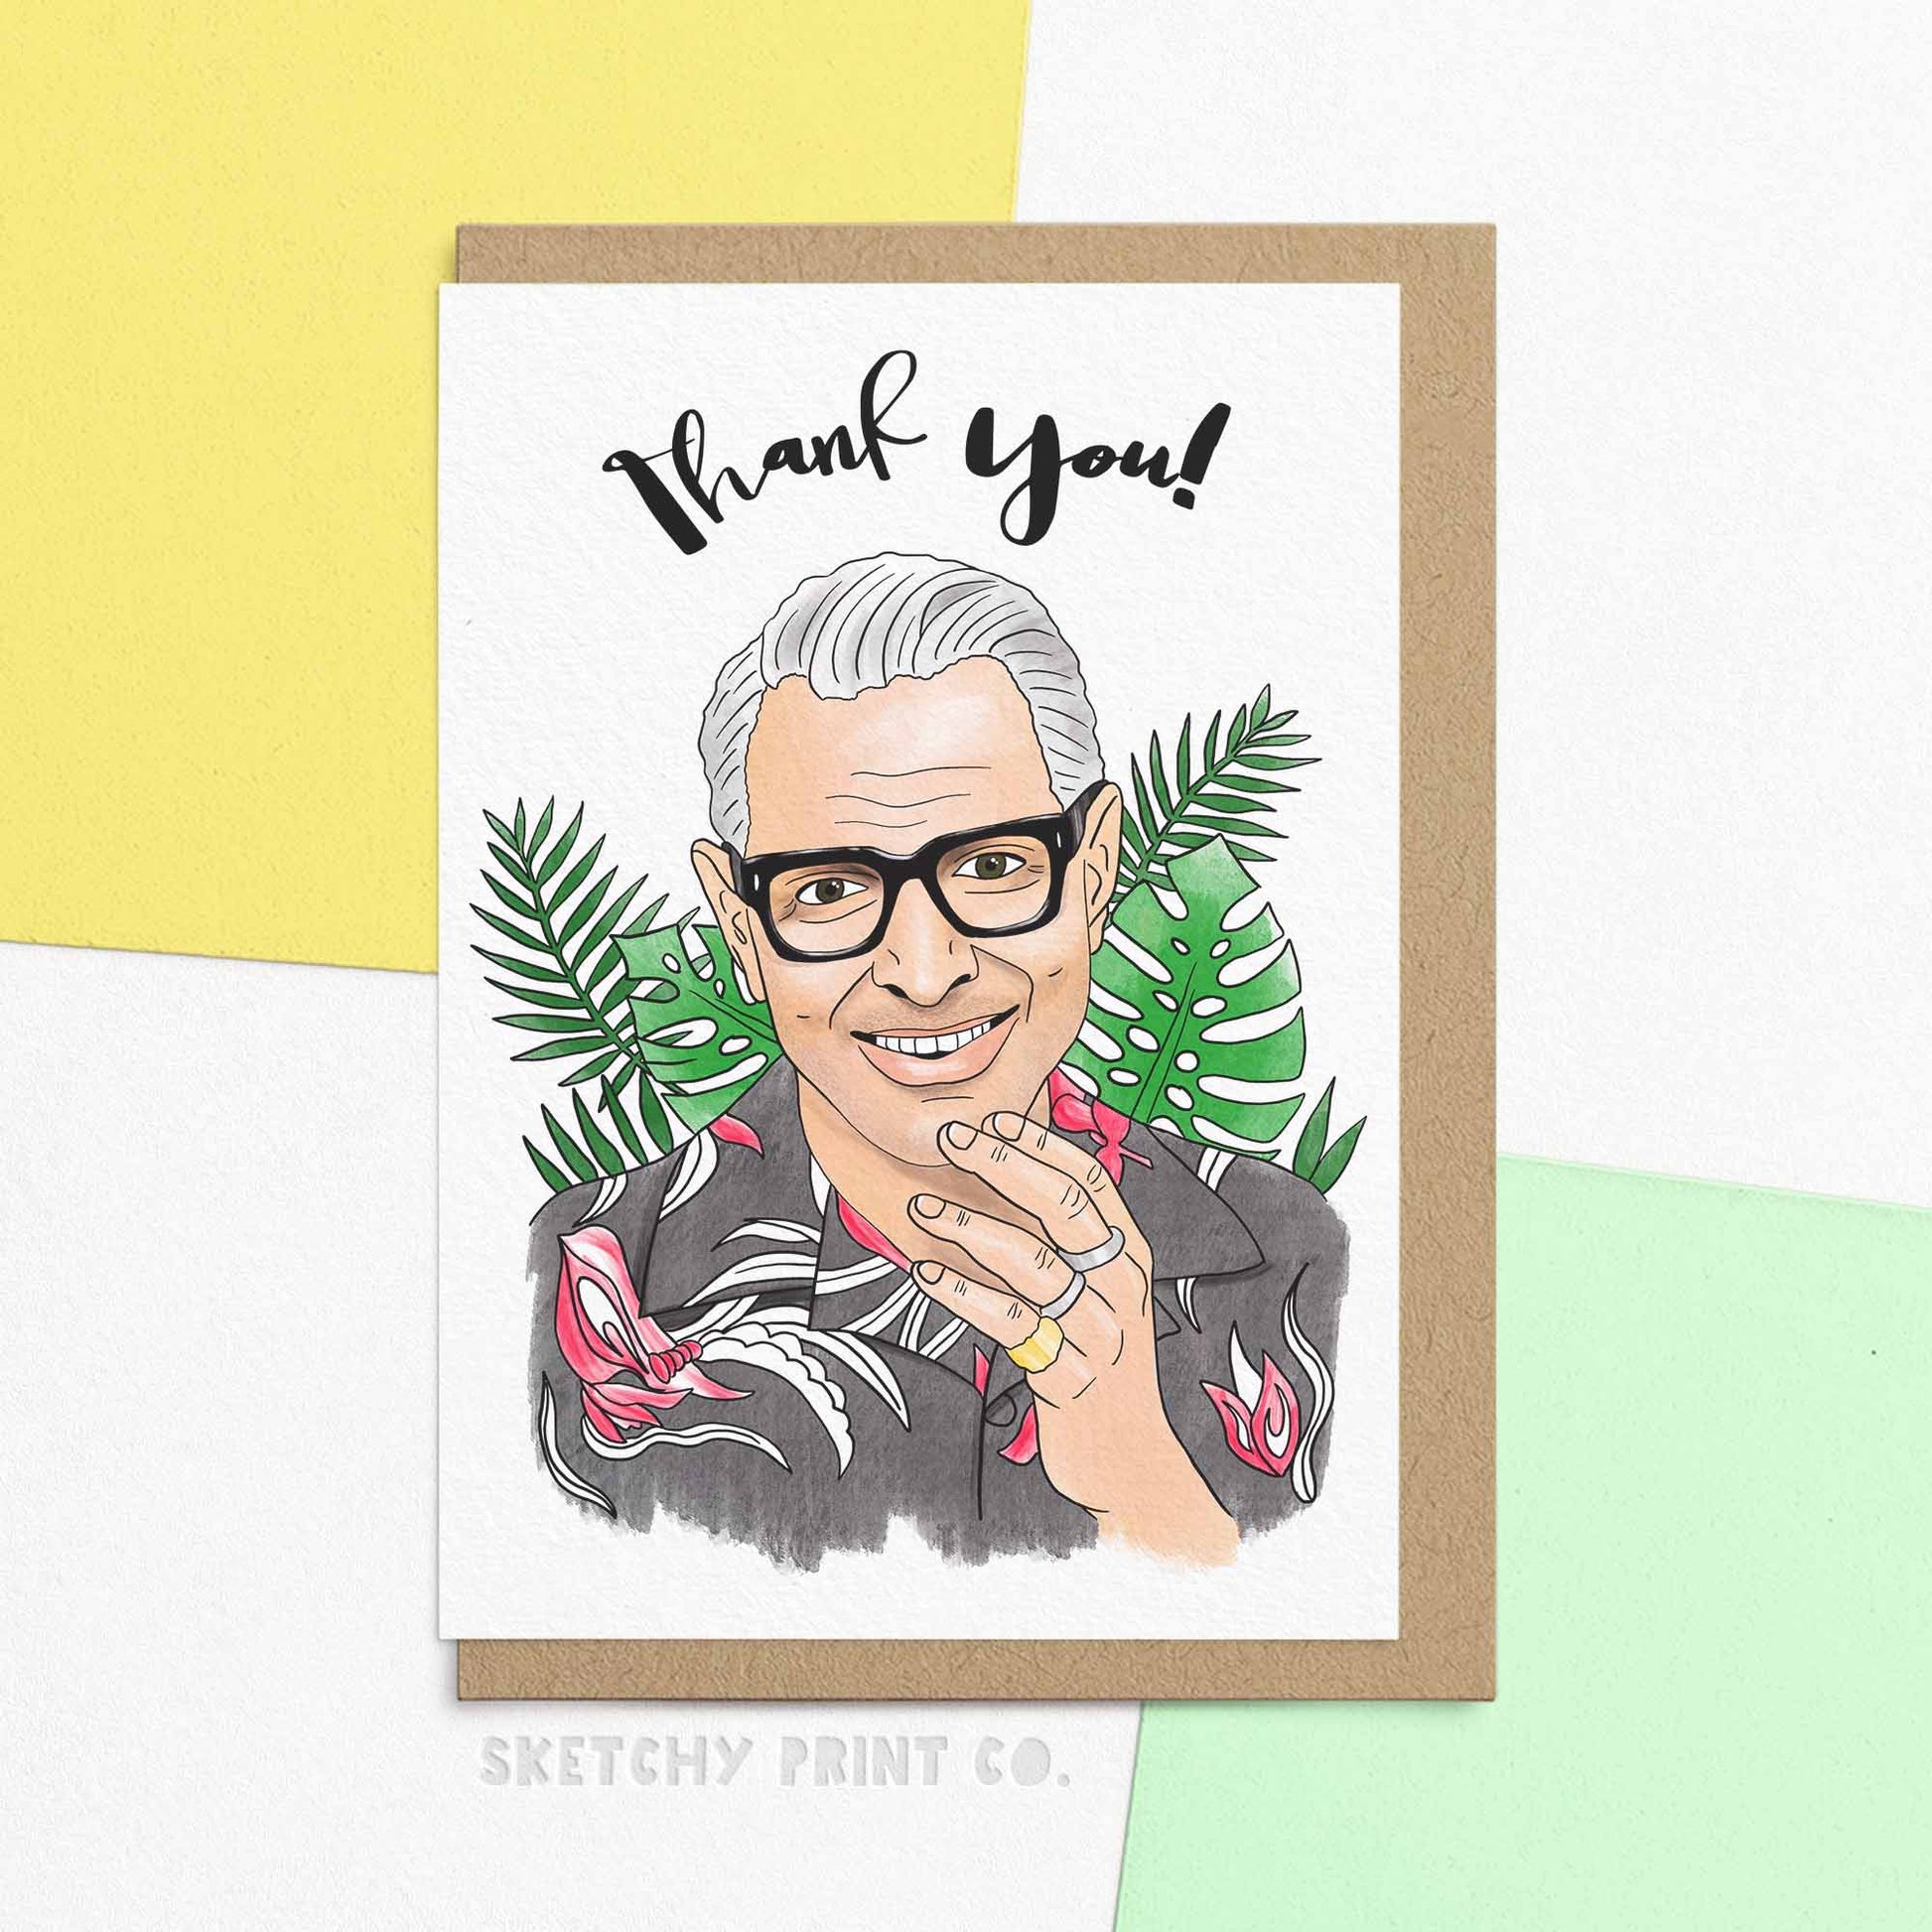 Funny Thank you card reading Thank you! With an arts interpretation of Jeff Goldblum. Express your gratitude in a unique way with Thank You, Jeff - the perfect funny thank you card for any occasion. Show your appreciation with a touch of humour and make their day with this quirky and playful card. No need for serious thank yous here!